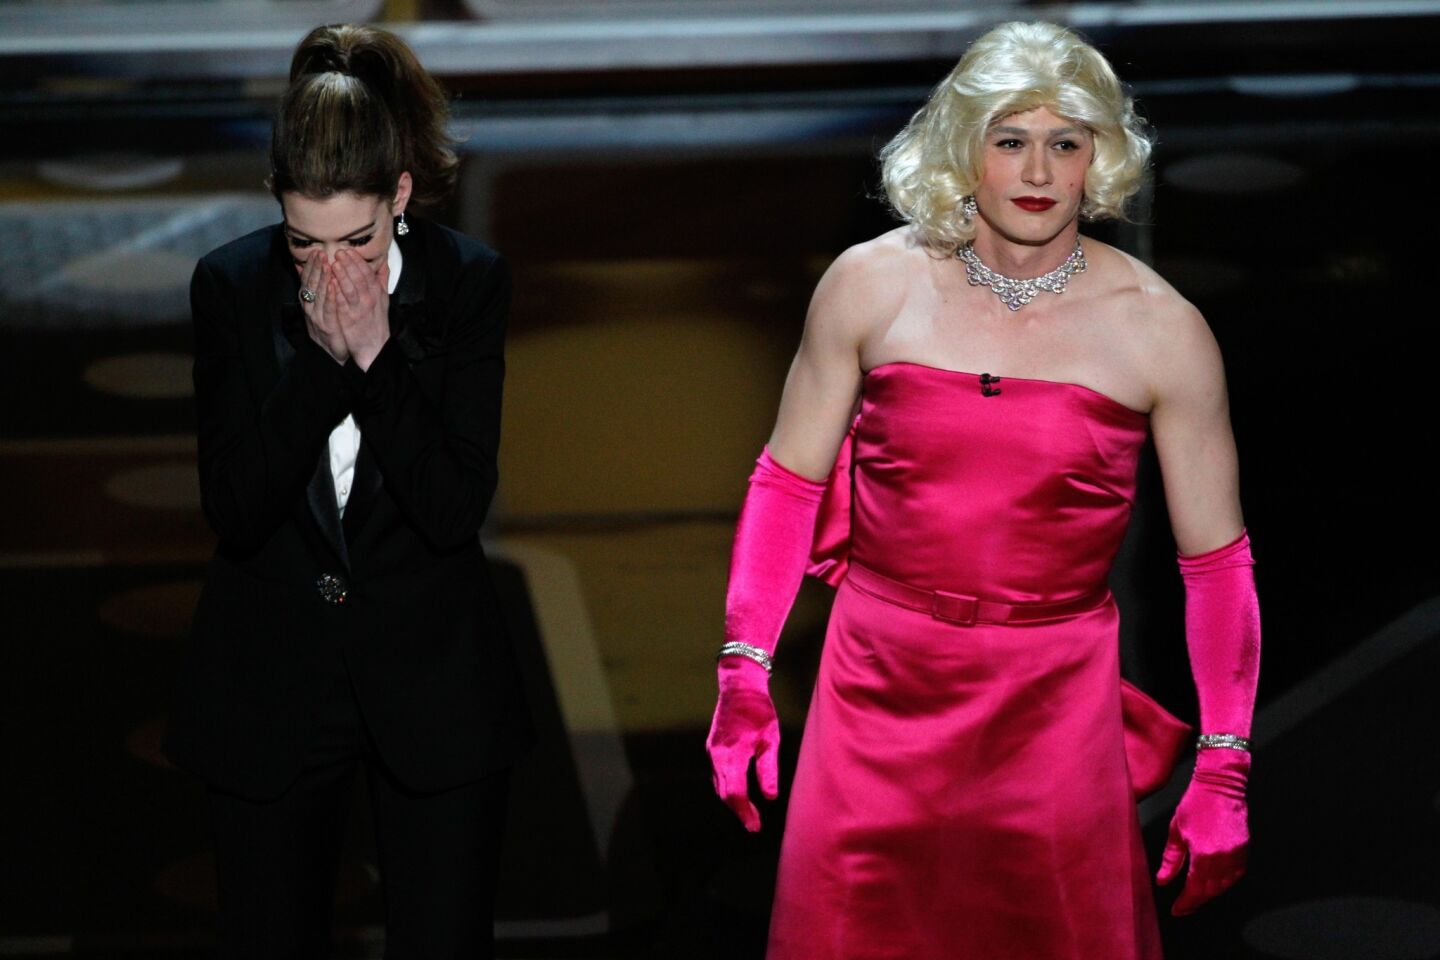 James Franco and Anne Hathaway were paired to host the 83rd Academy Awards. Unfortunately, most people agreed the show was a bust. Hathaway gave an honest effort, and even looked like she was trying to overcompensate for Franco, who at best could be described as not mentally present.